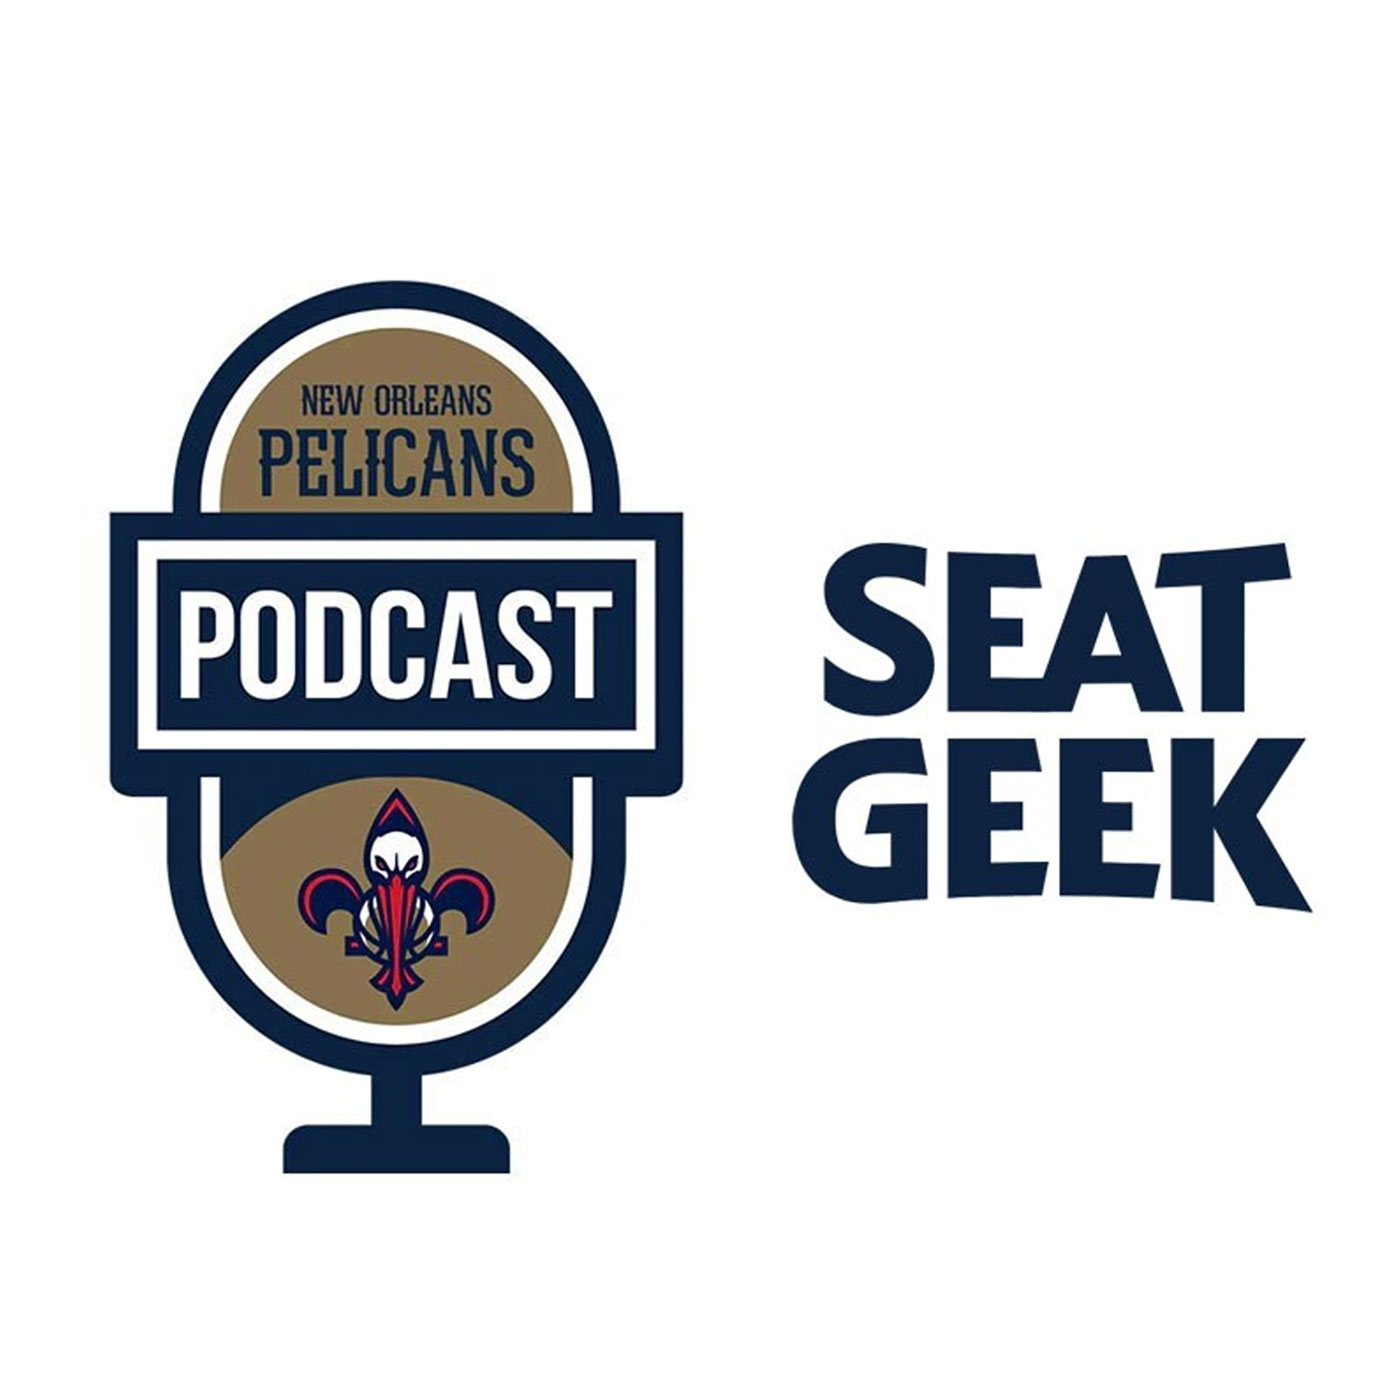 NBA Draft Preview on the New Orleans Pelicans Podcast presented by SeatGeek - May 16, 2022